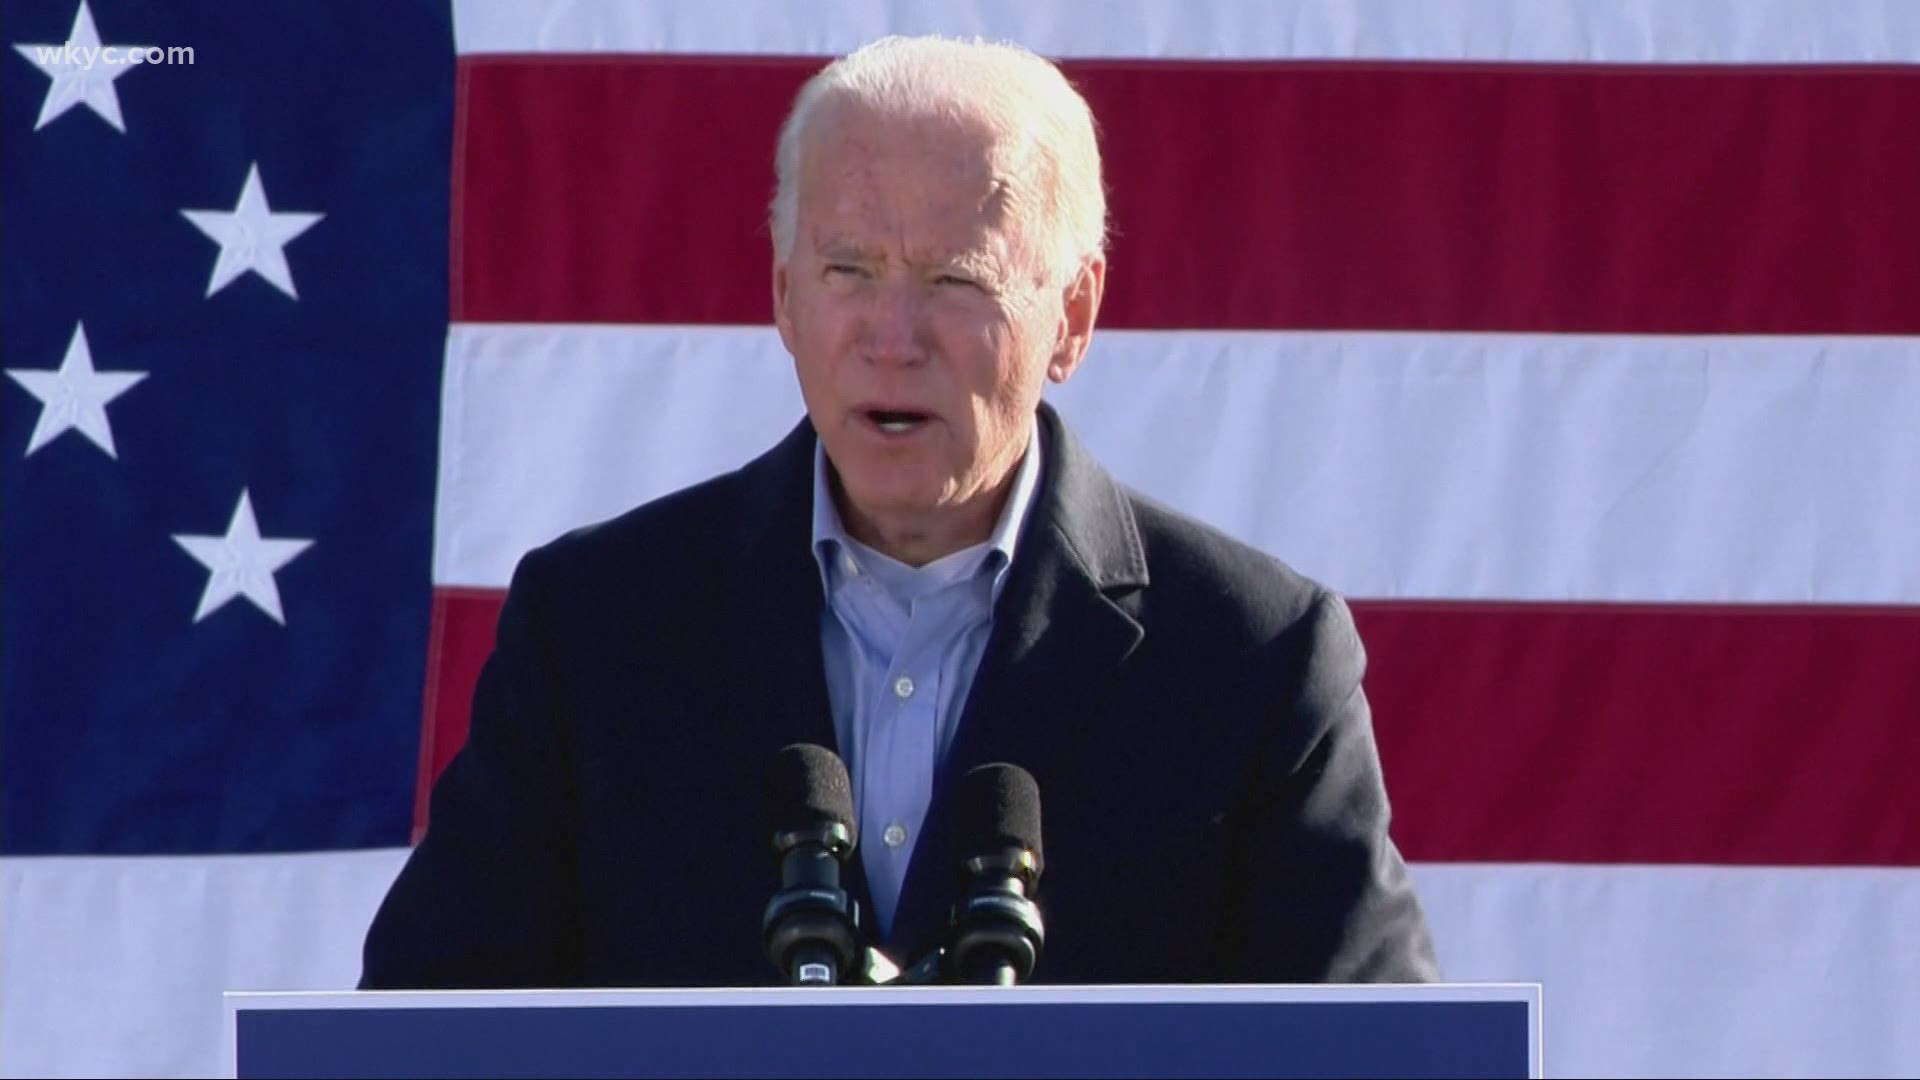 President Trump and Joe Biden brought their campaigns to battleground state on Monday. It was a last effort ahead of election day. Romney Smith reports.